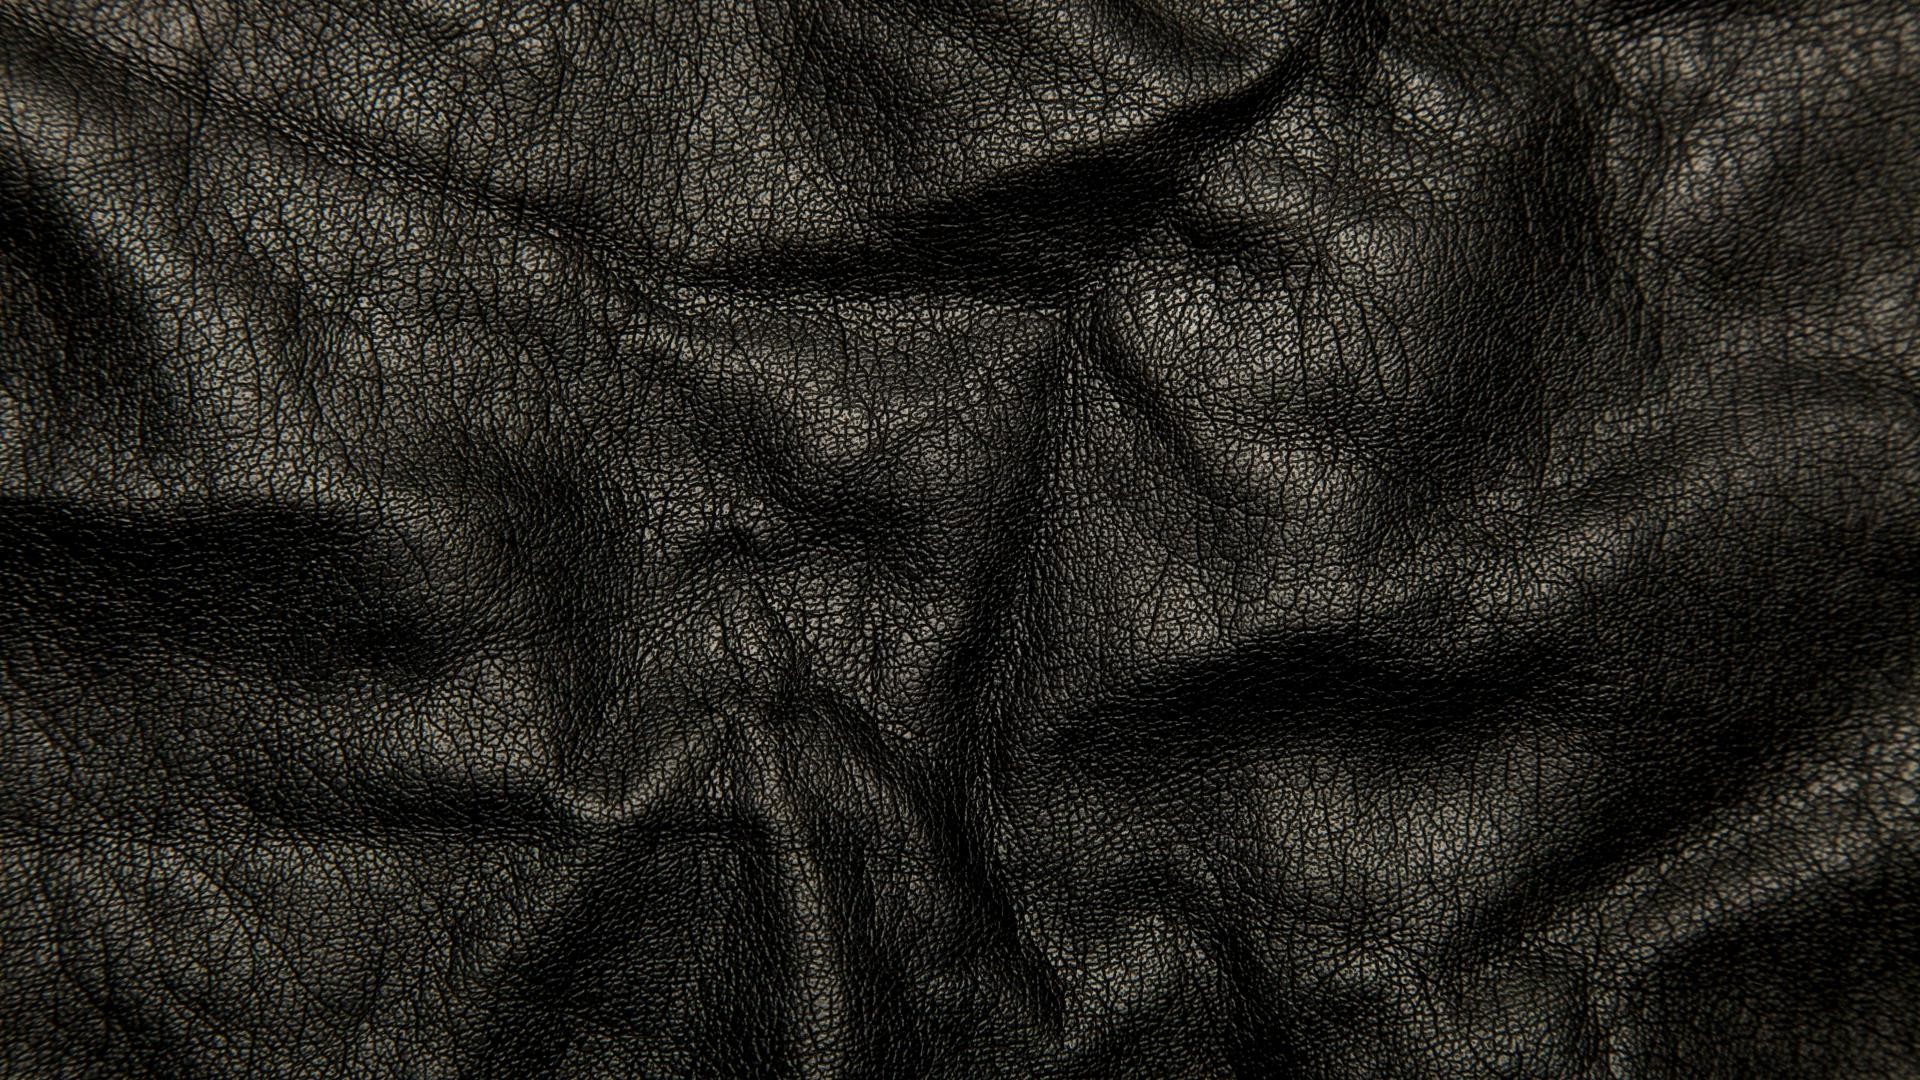 1920x1080 6. leather-wallpaper5-600x338